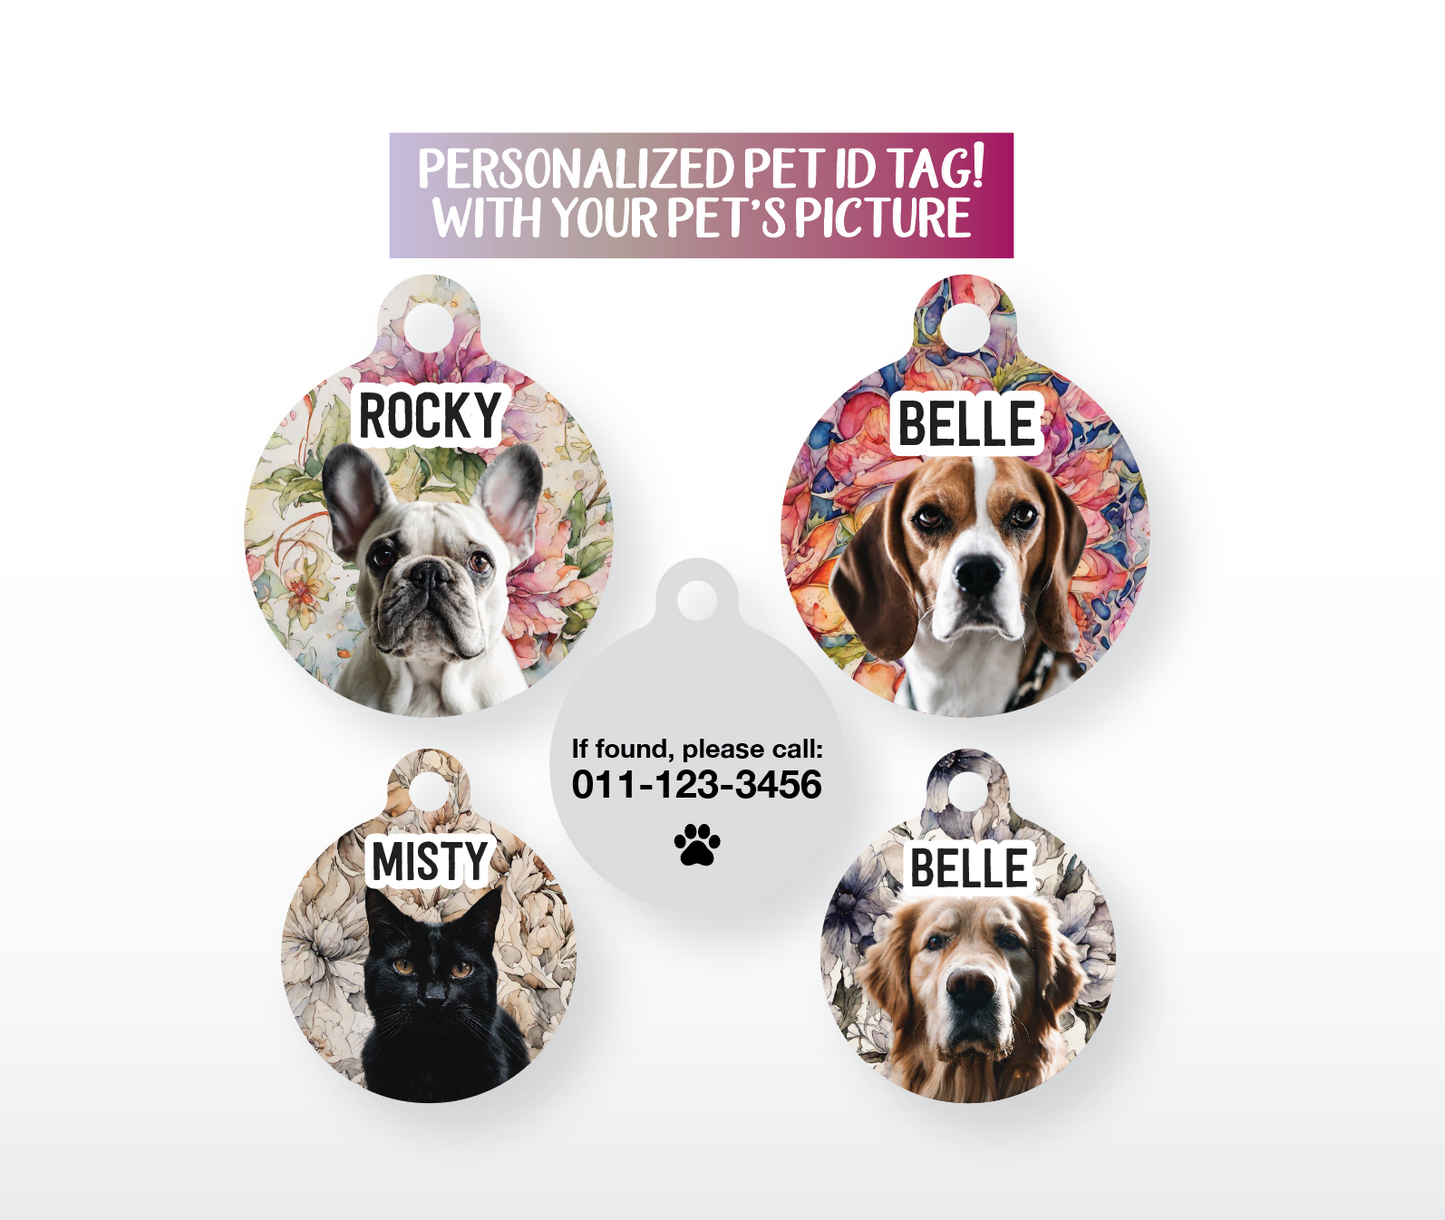 Personalized Cat and Dog ID Tag with your pet's picture!